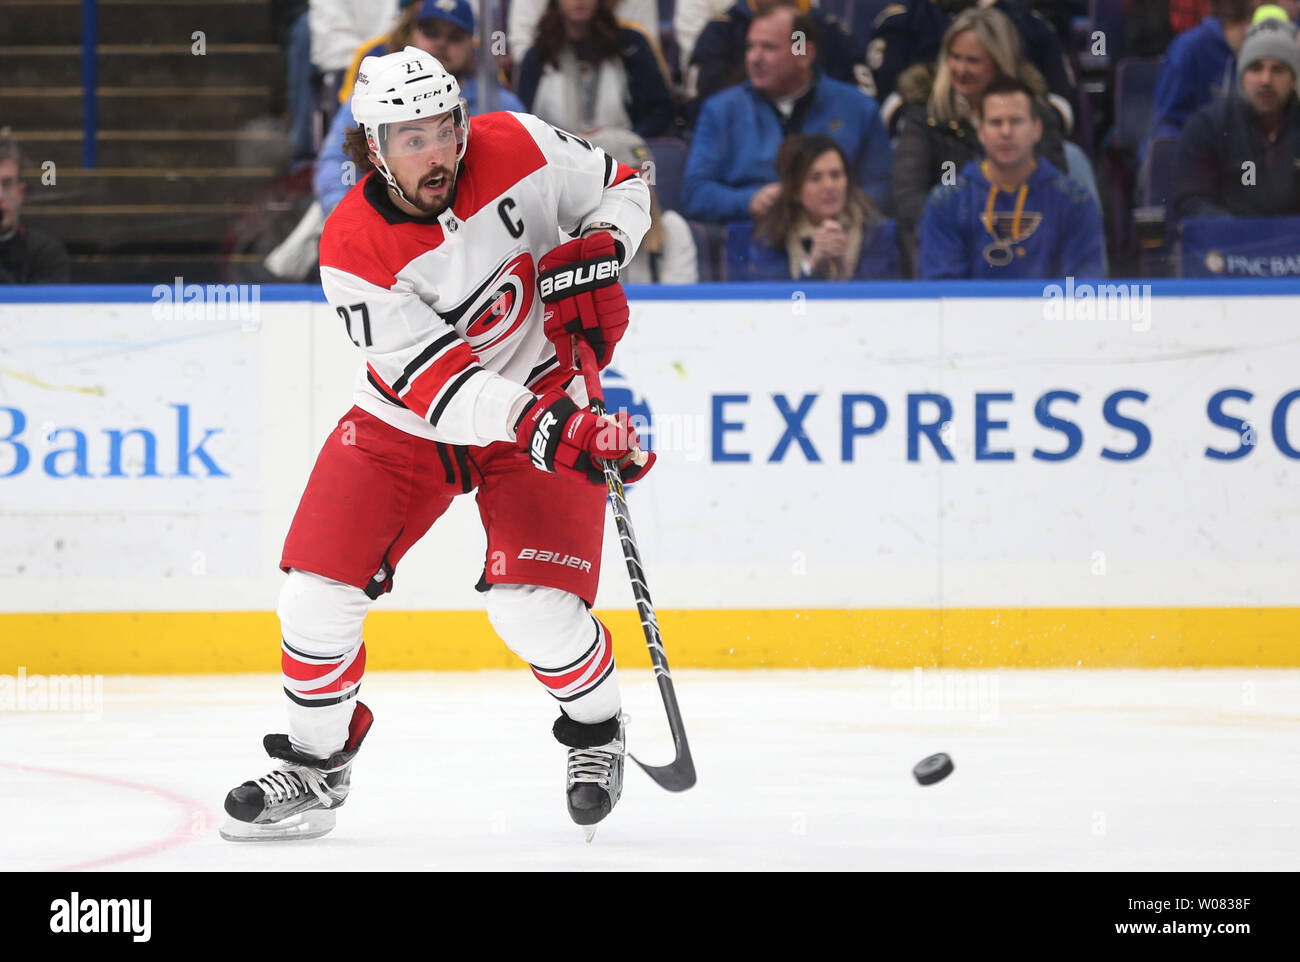 Carolina Hurricanes - Kings vs. Canes First Goal Contest → ENTER:   You could win this puck signed by Justin Faulk!